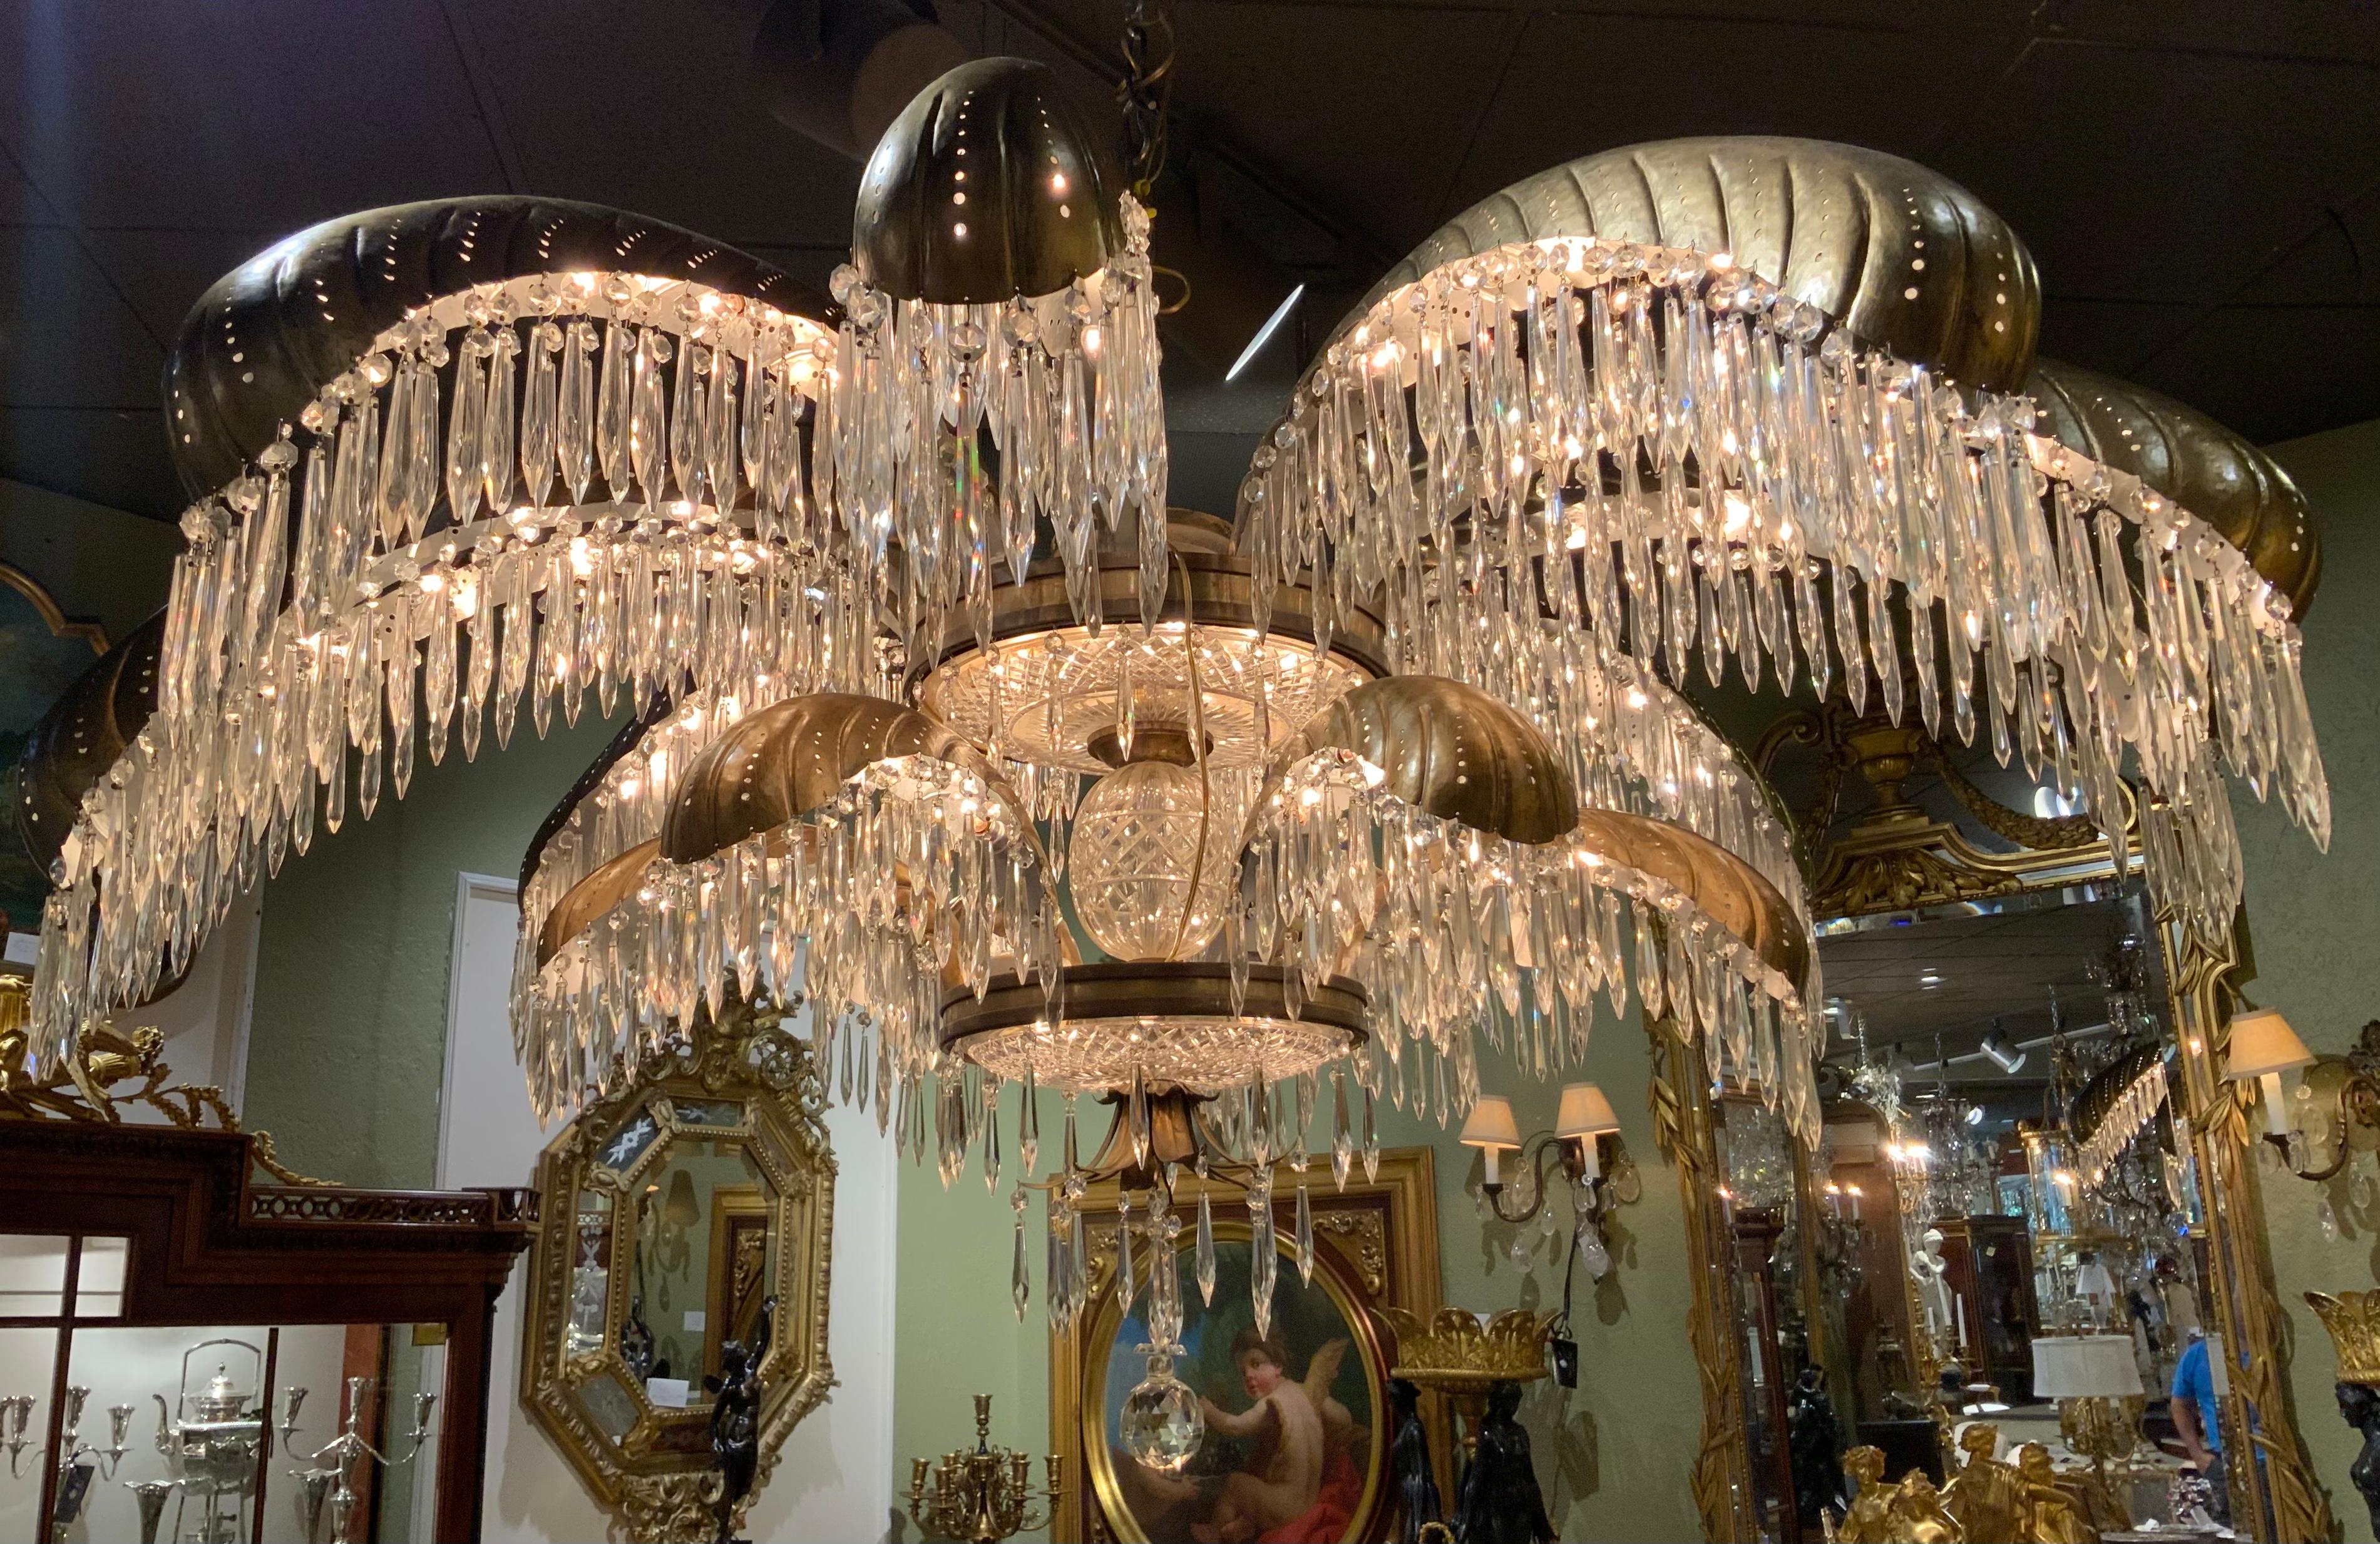 20th Century Monumental Art Deco Chandelier with 84 Lights and 800 Crystals